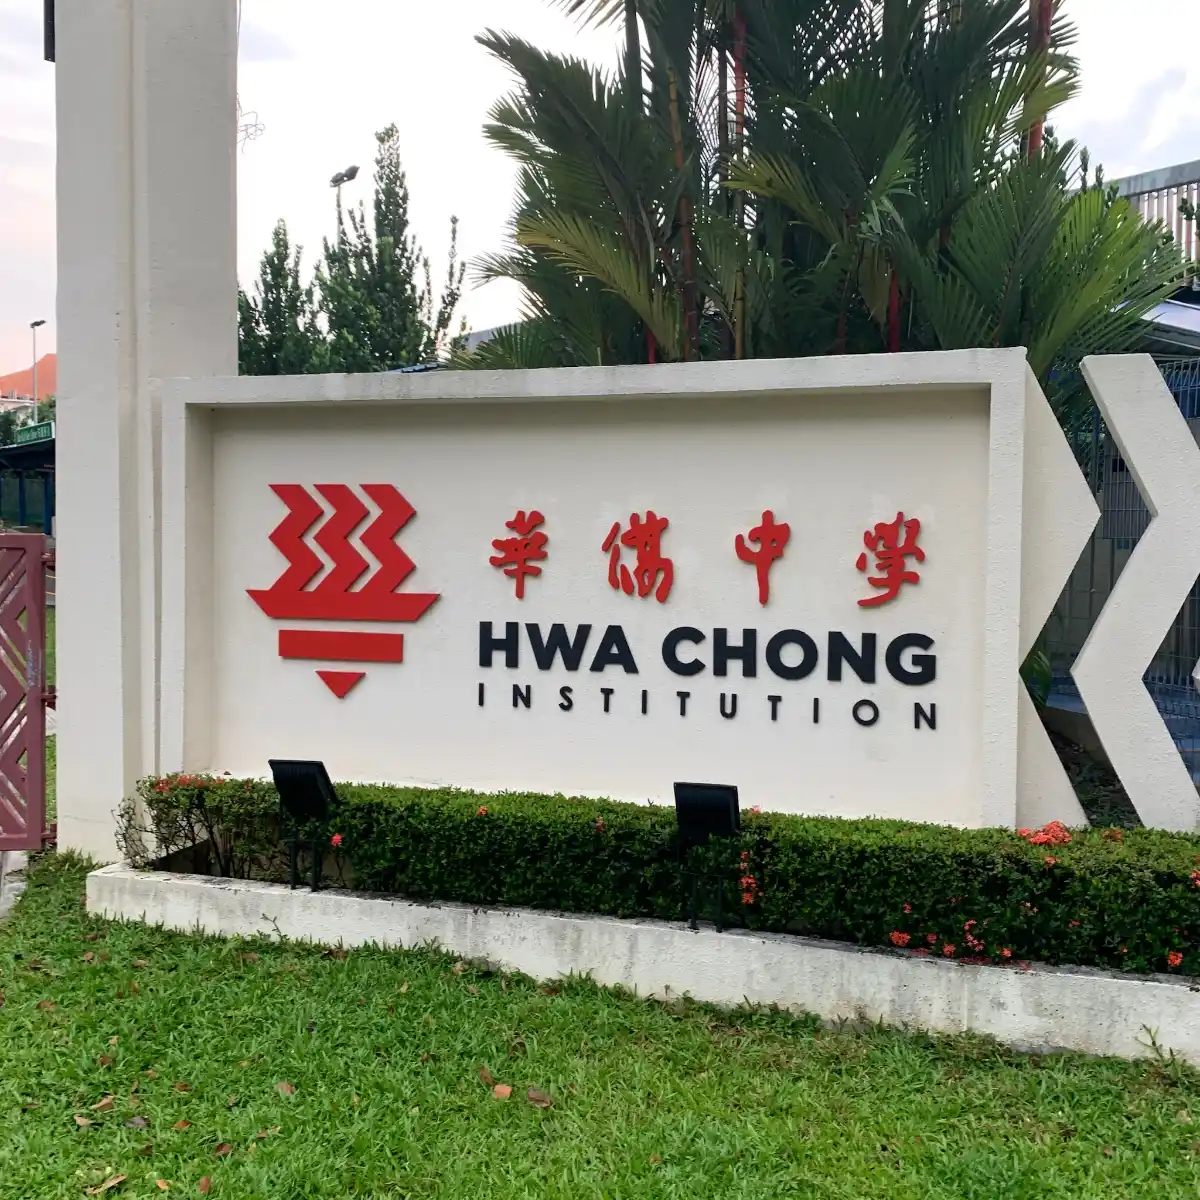 Hwa Chong Institution is close to Watten House